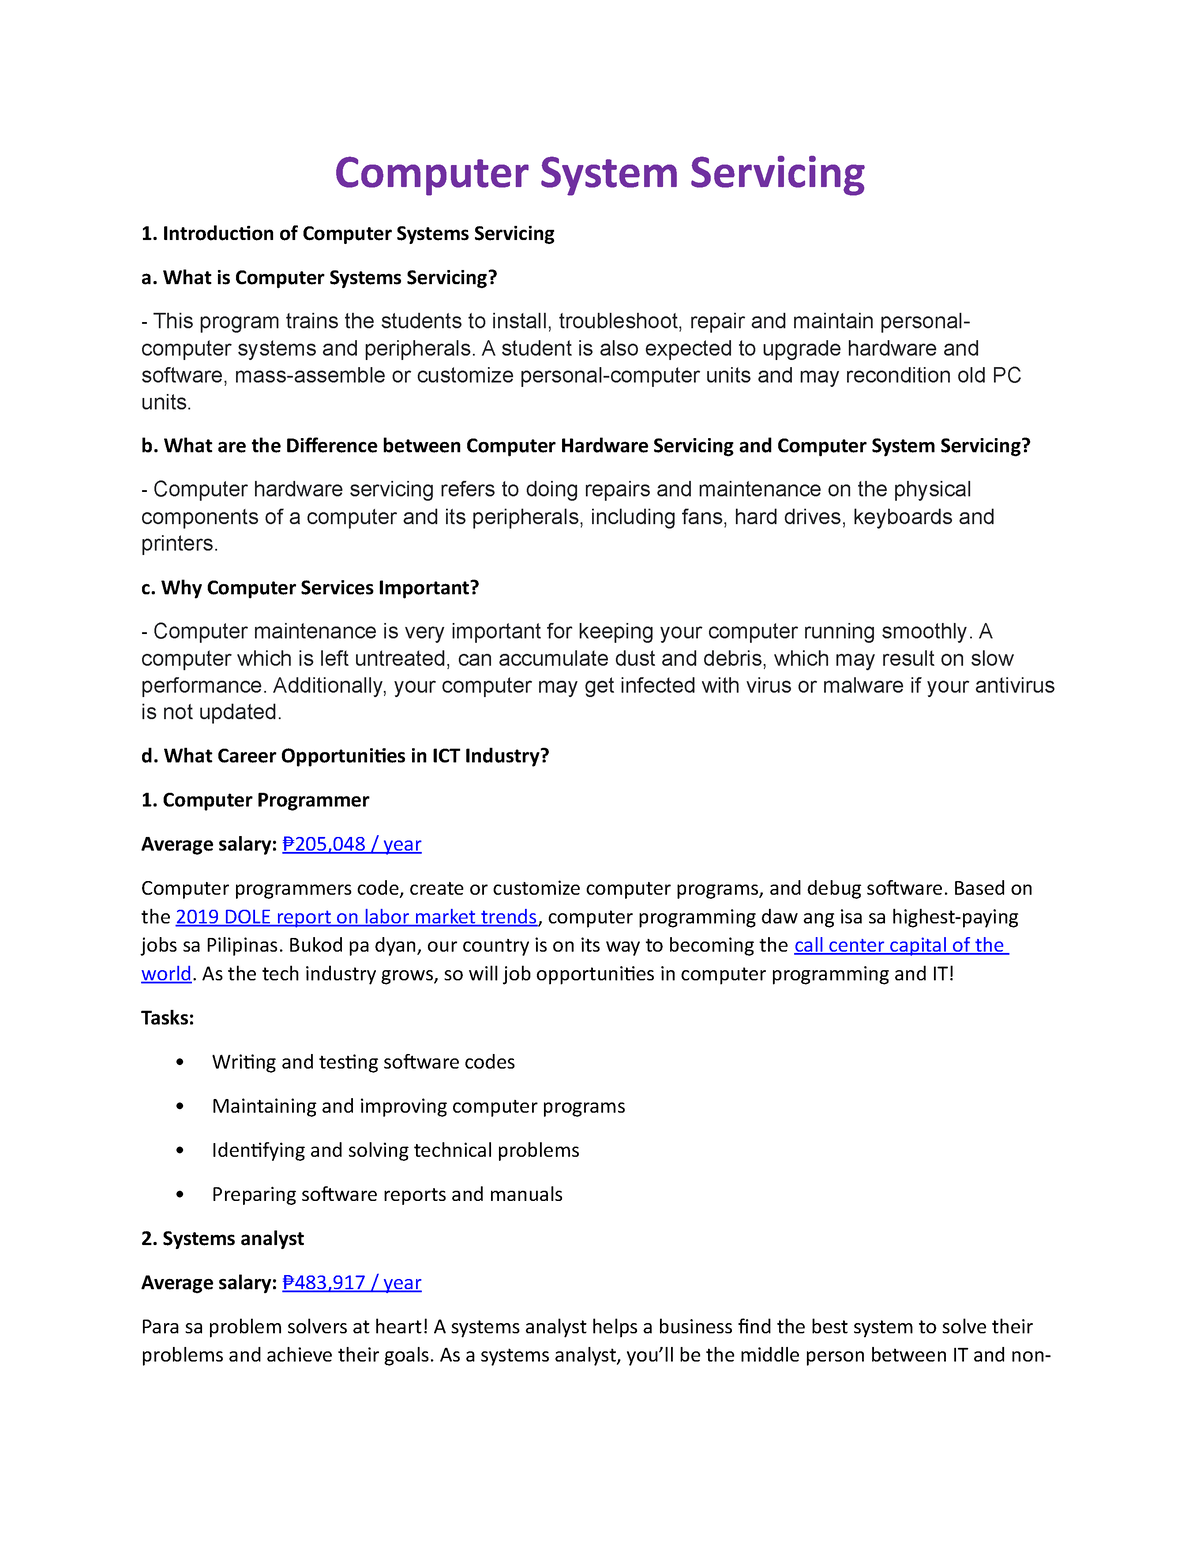 research paper about computer system servicing